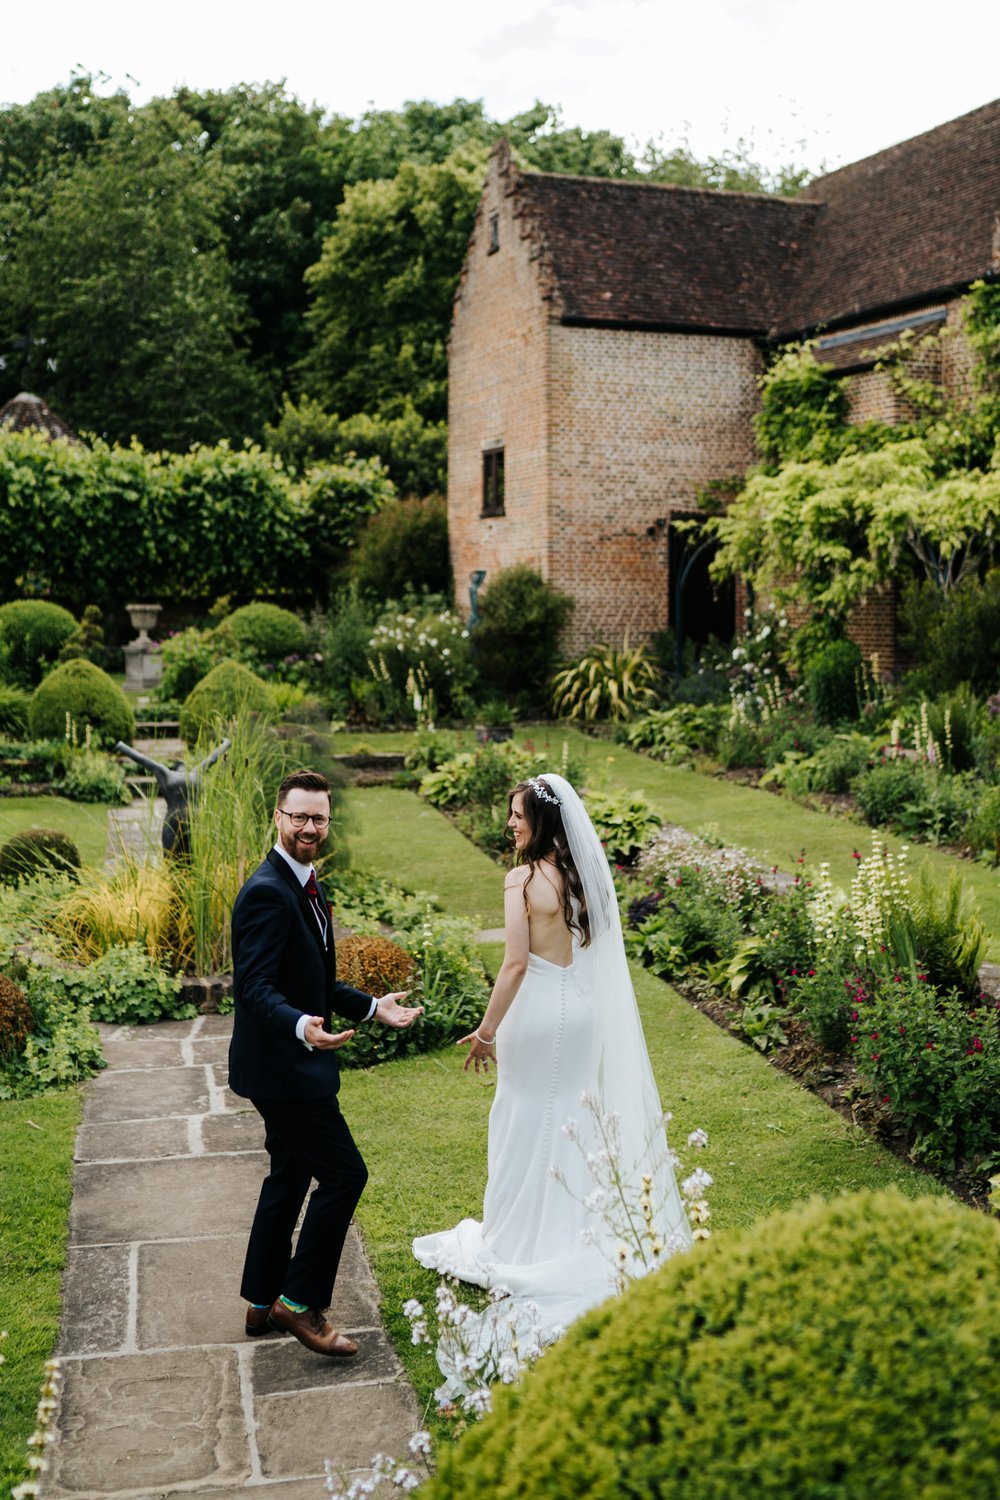 Bride and groom walk away from camera as groom holds hands up in confusion after throwing bride's veil during Chenies Manorhouse wedding